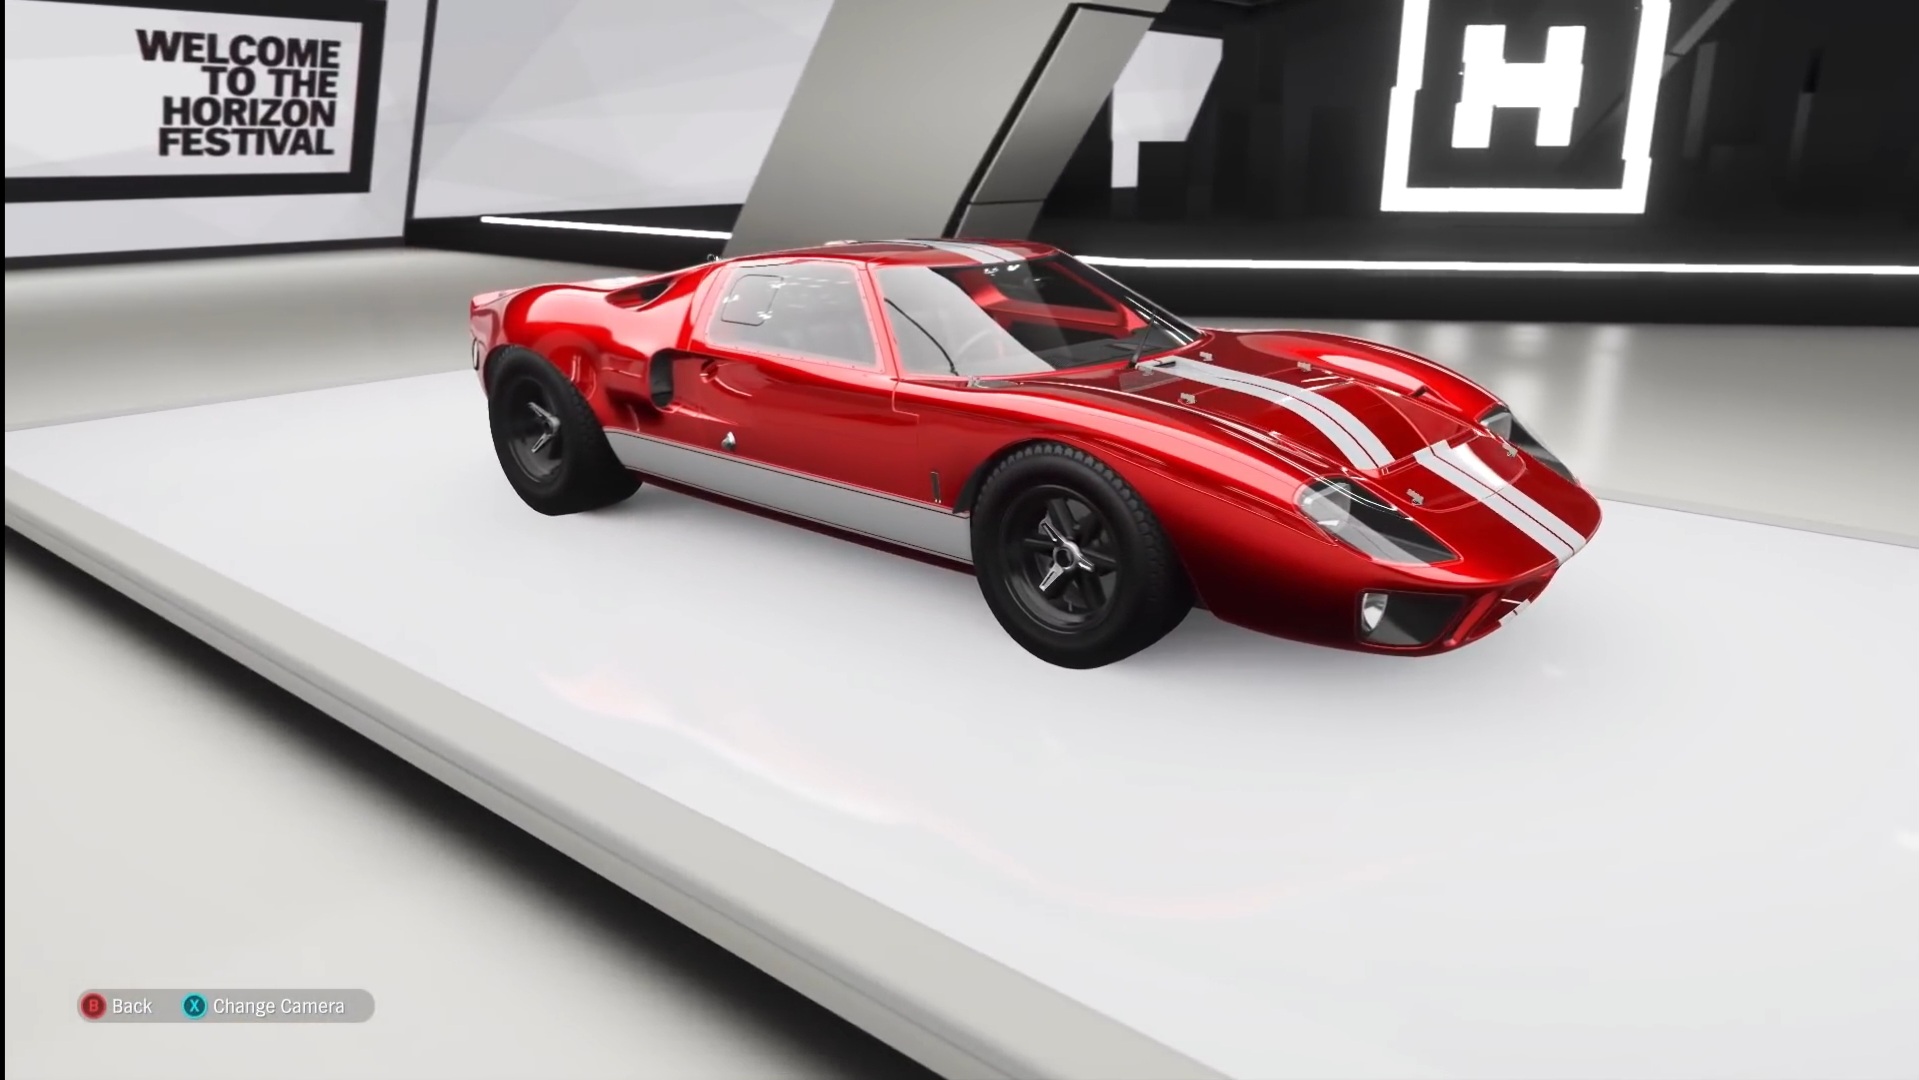 The 1964 Ford GT40 MKI in Forza Horizon 4.